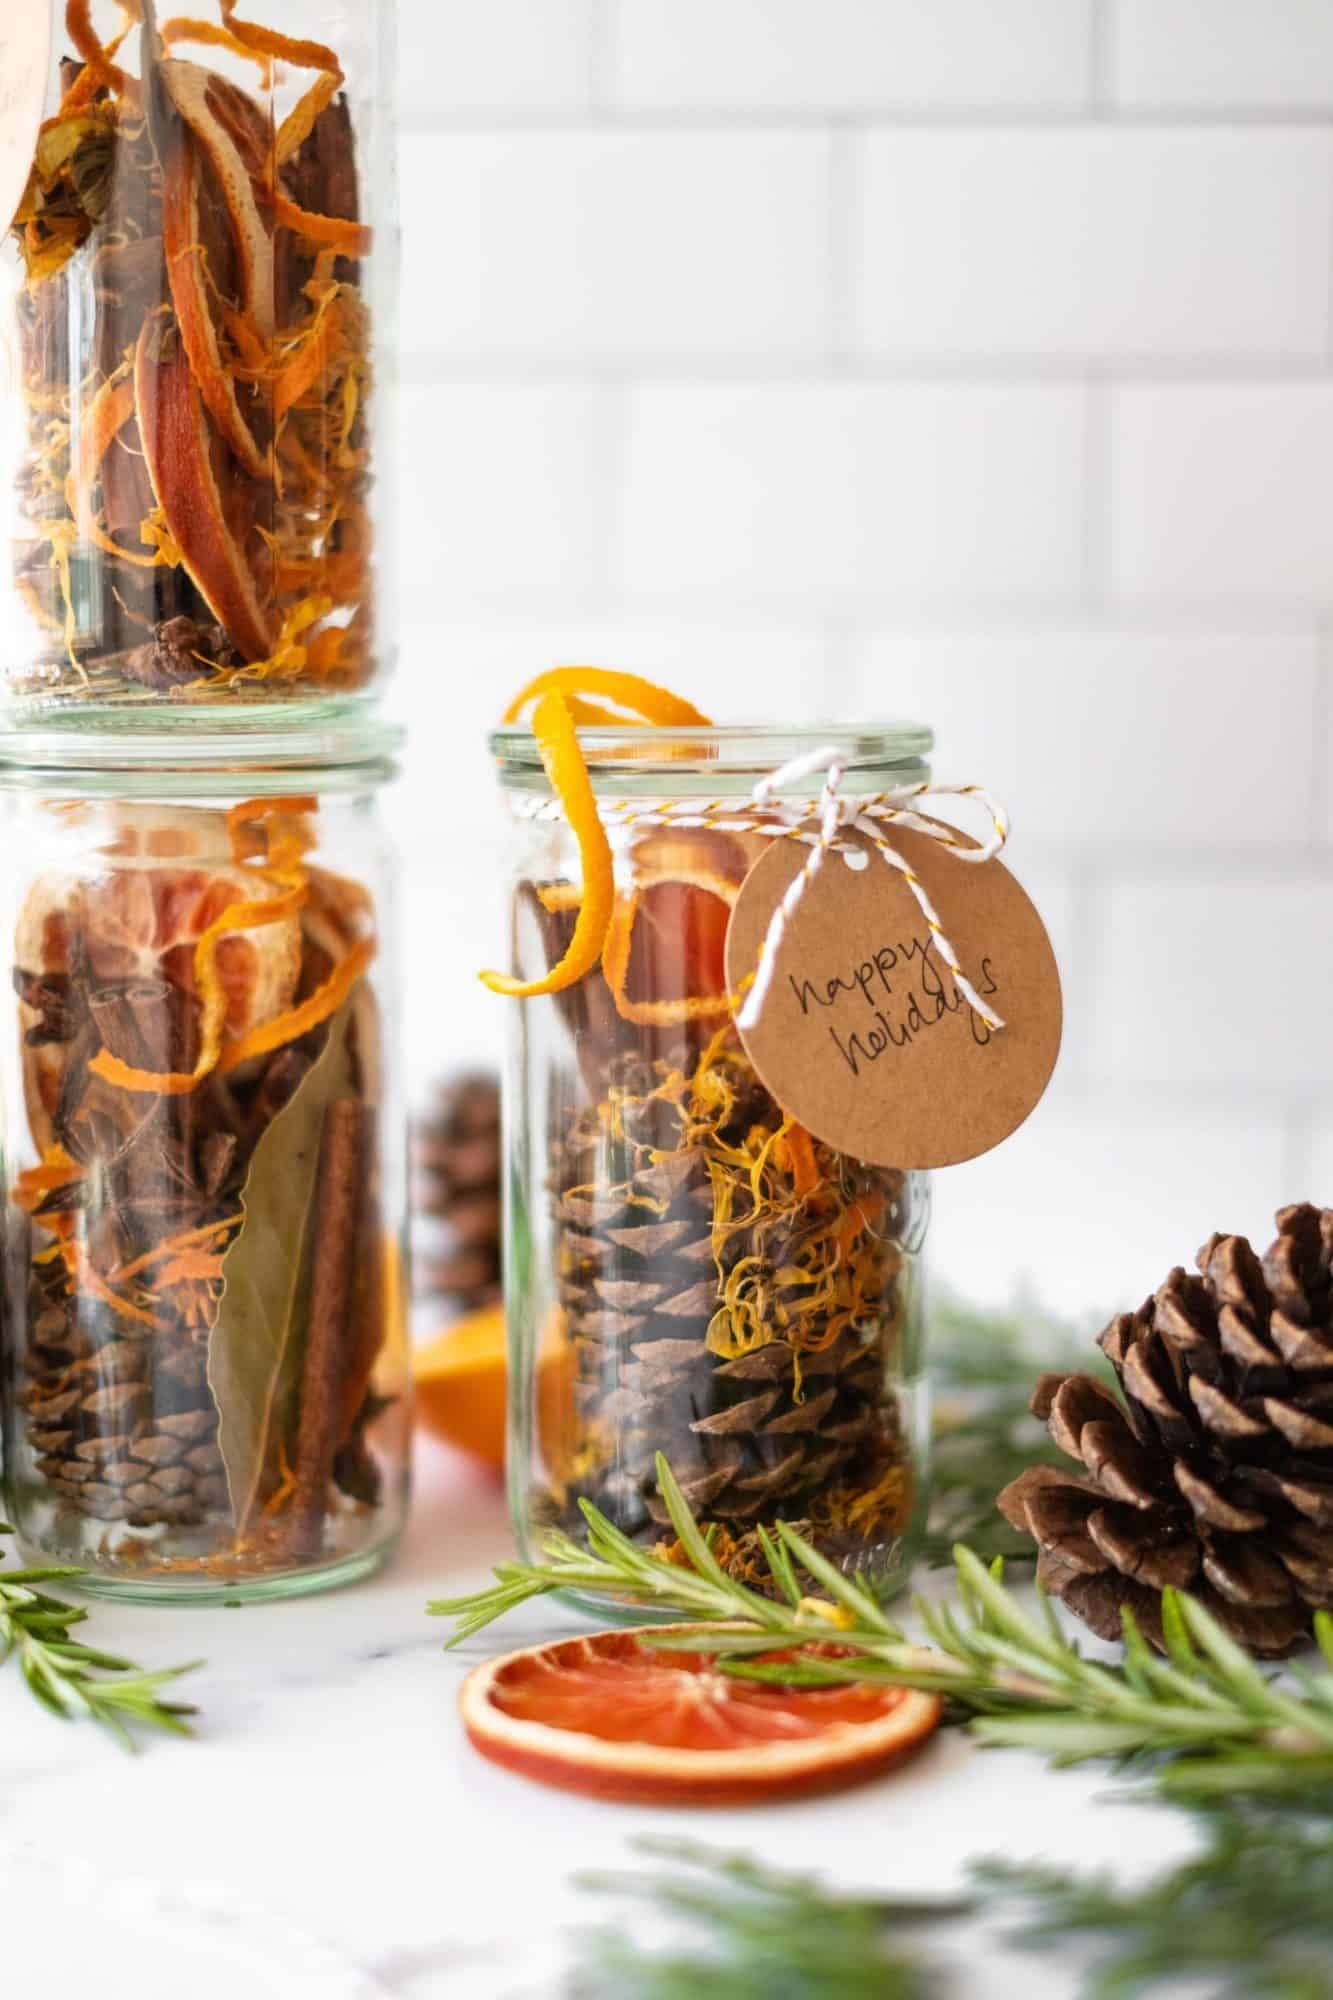 Cosy and Creative: Mini Pine Cones with Hygge Vibes for Your Craft Projects